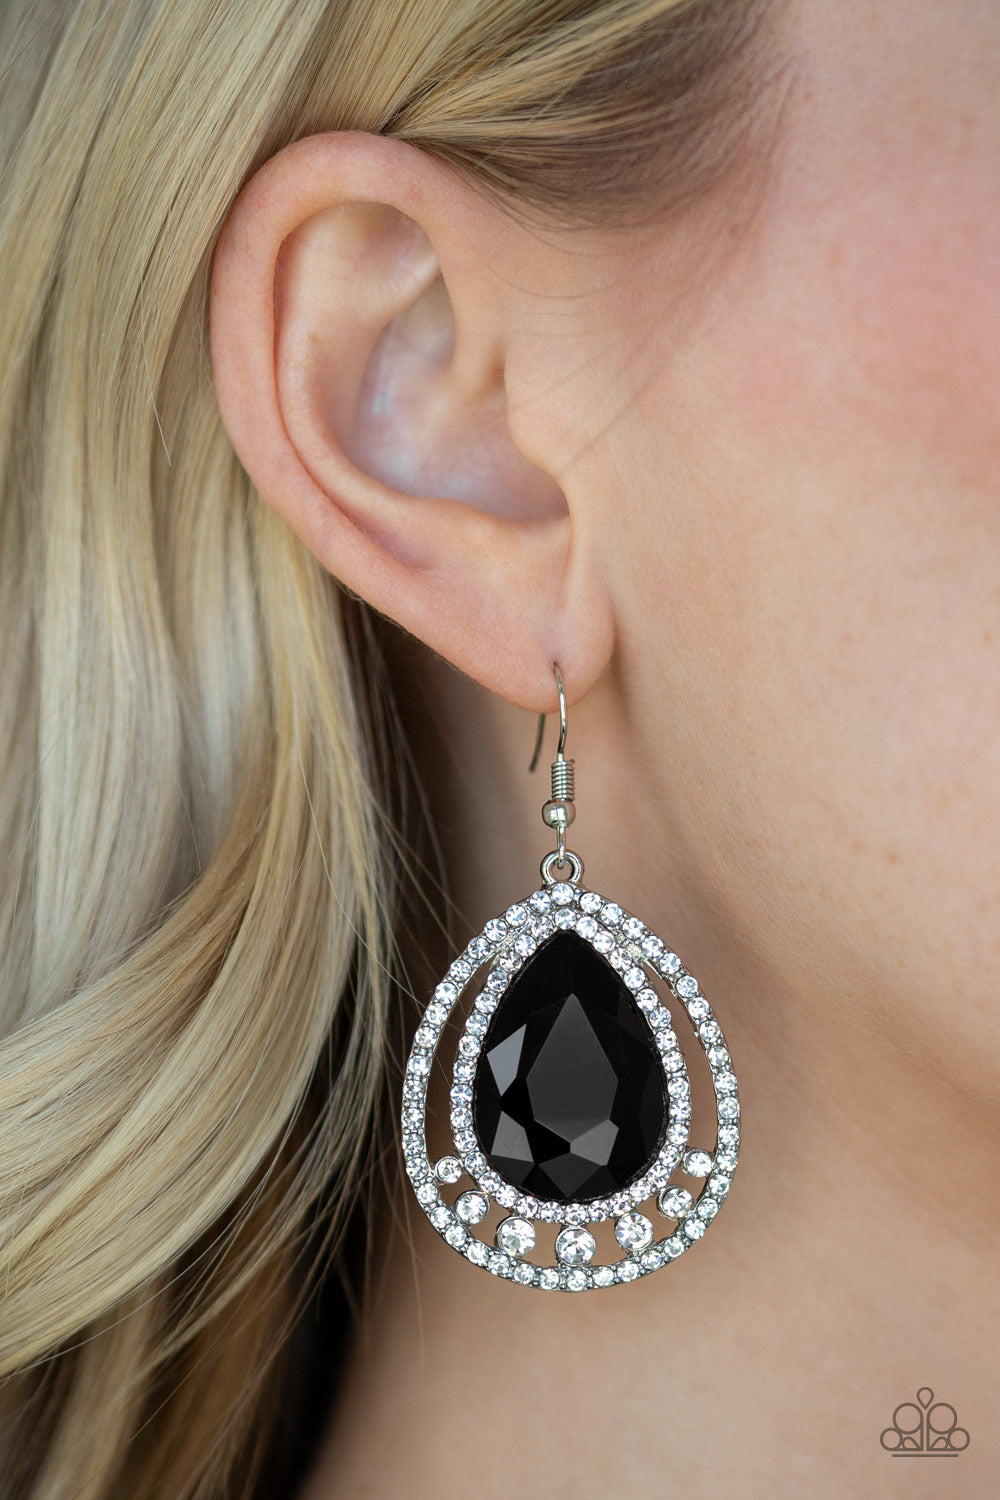 Paparazzi All Rise For Her Majesty Black Fishhook Earrings